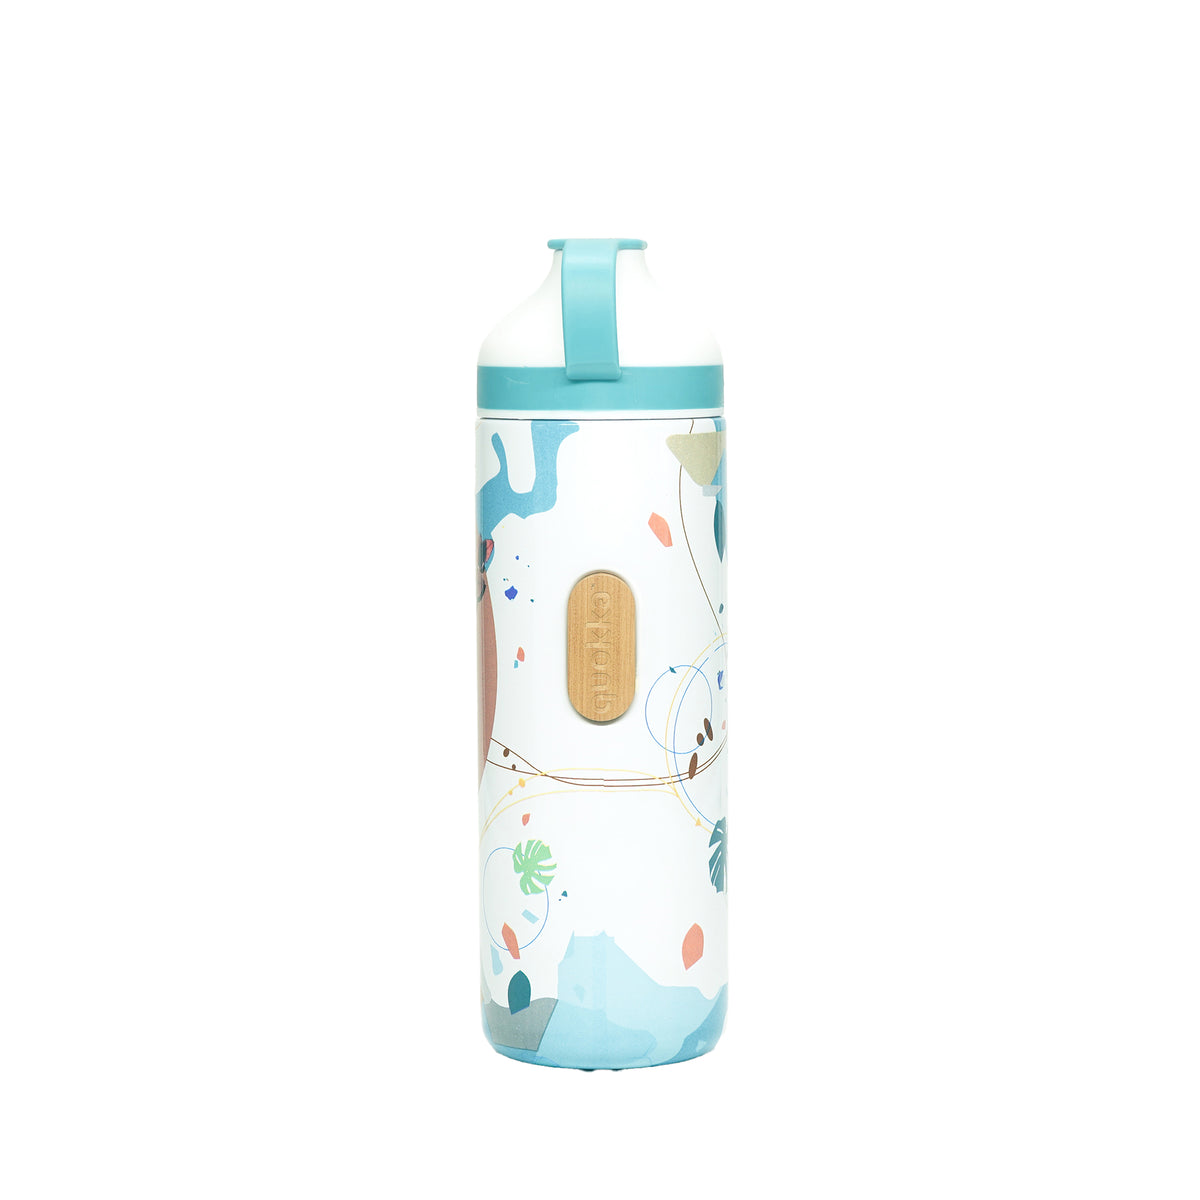 MAGSNAP Vacuum Bottle (Magnetic Feature) Blue Abstract